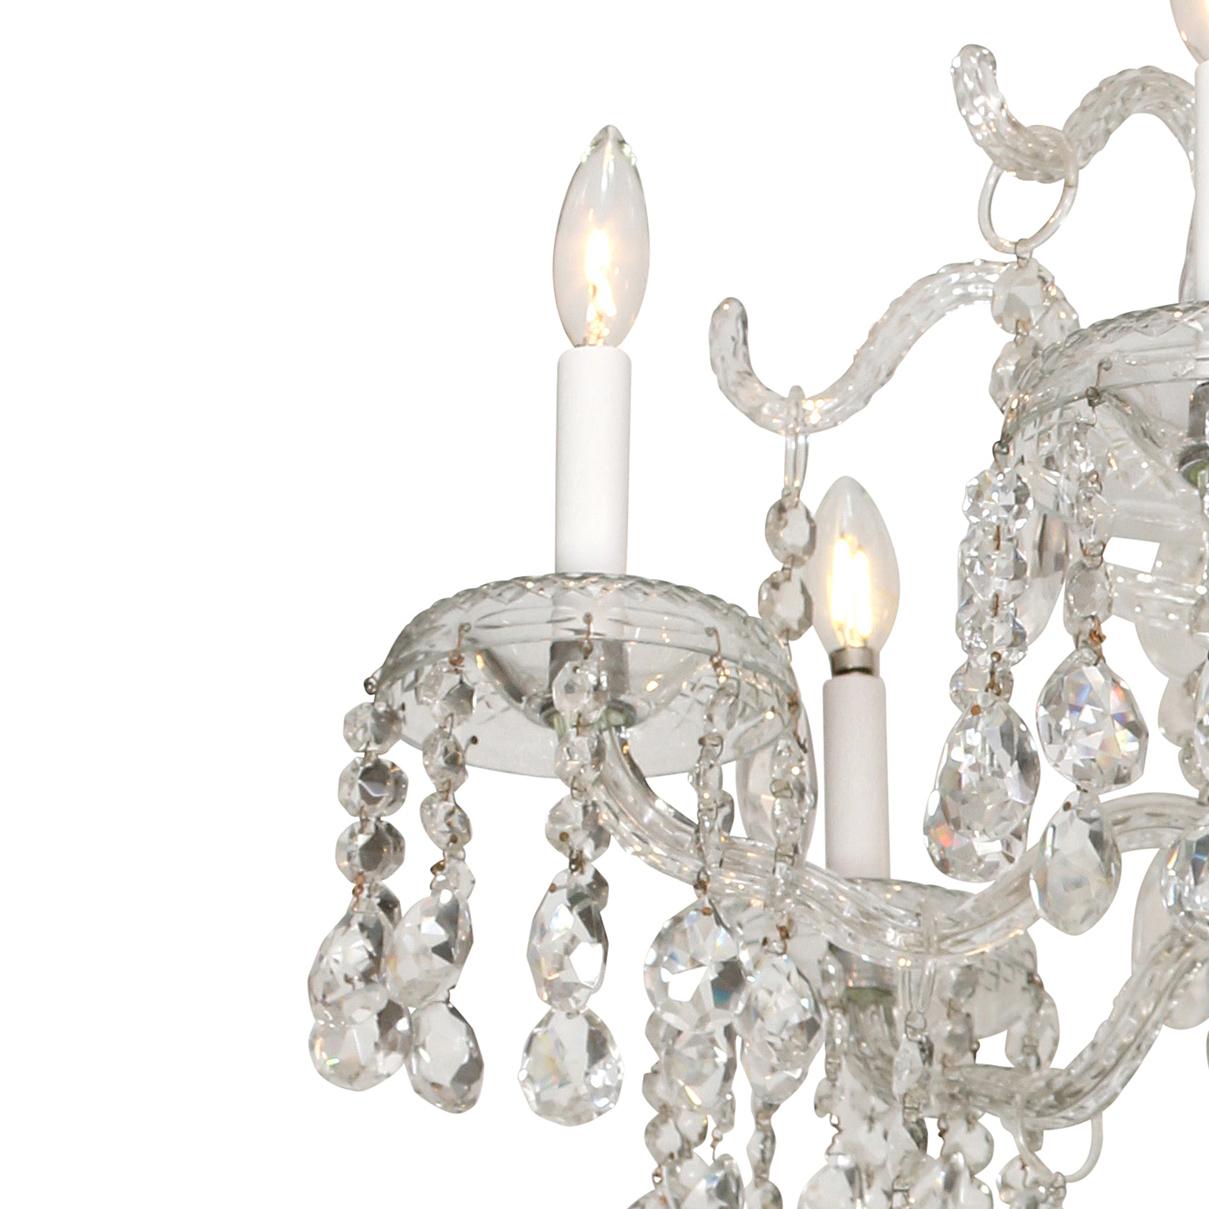 A fanciful six-arm chandelier with four tiers decorated with crystal prisms, beads and balls. This gem will add a touch of fun and glamour to any space!